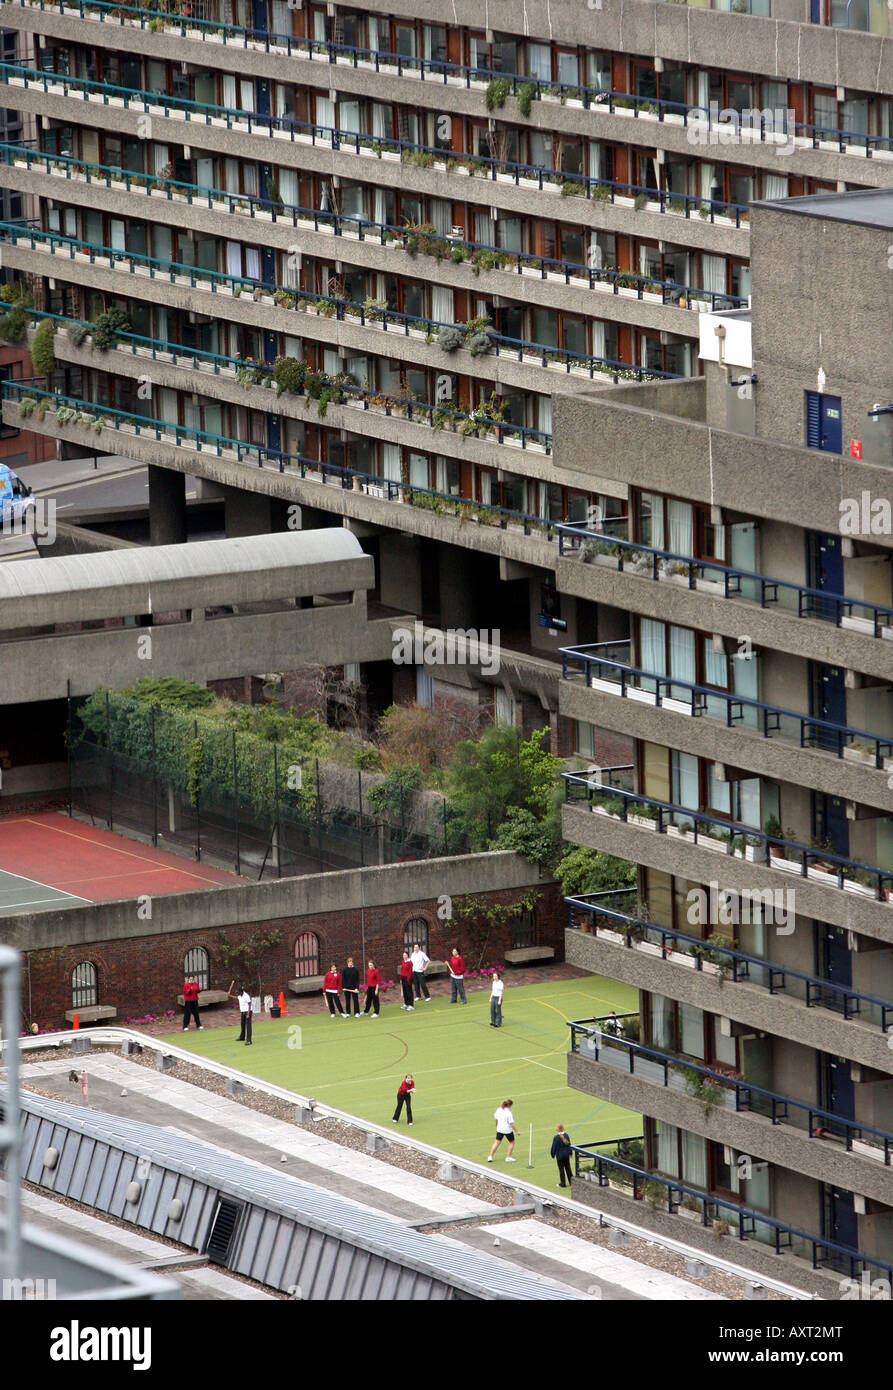 Children play in an inner city playground surrounded by high rise flats near Barbican central London Stock Photo